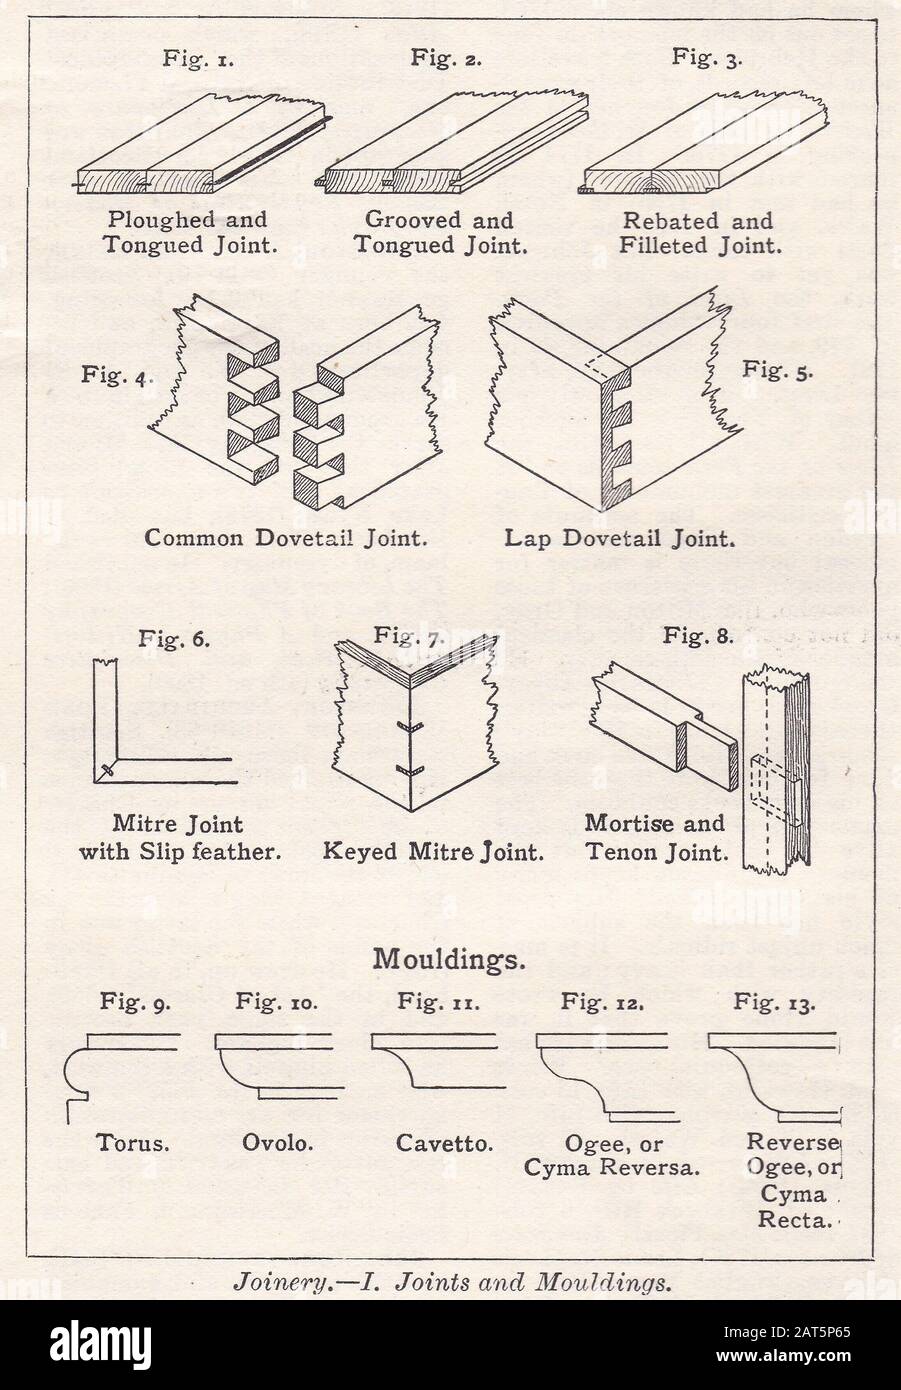 illustrations / diagrams of Joinery - Joints and Mouldings 1930s Stock Photo